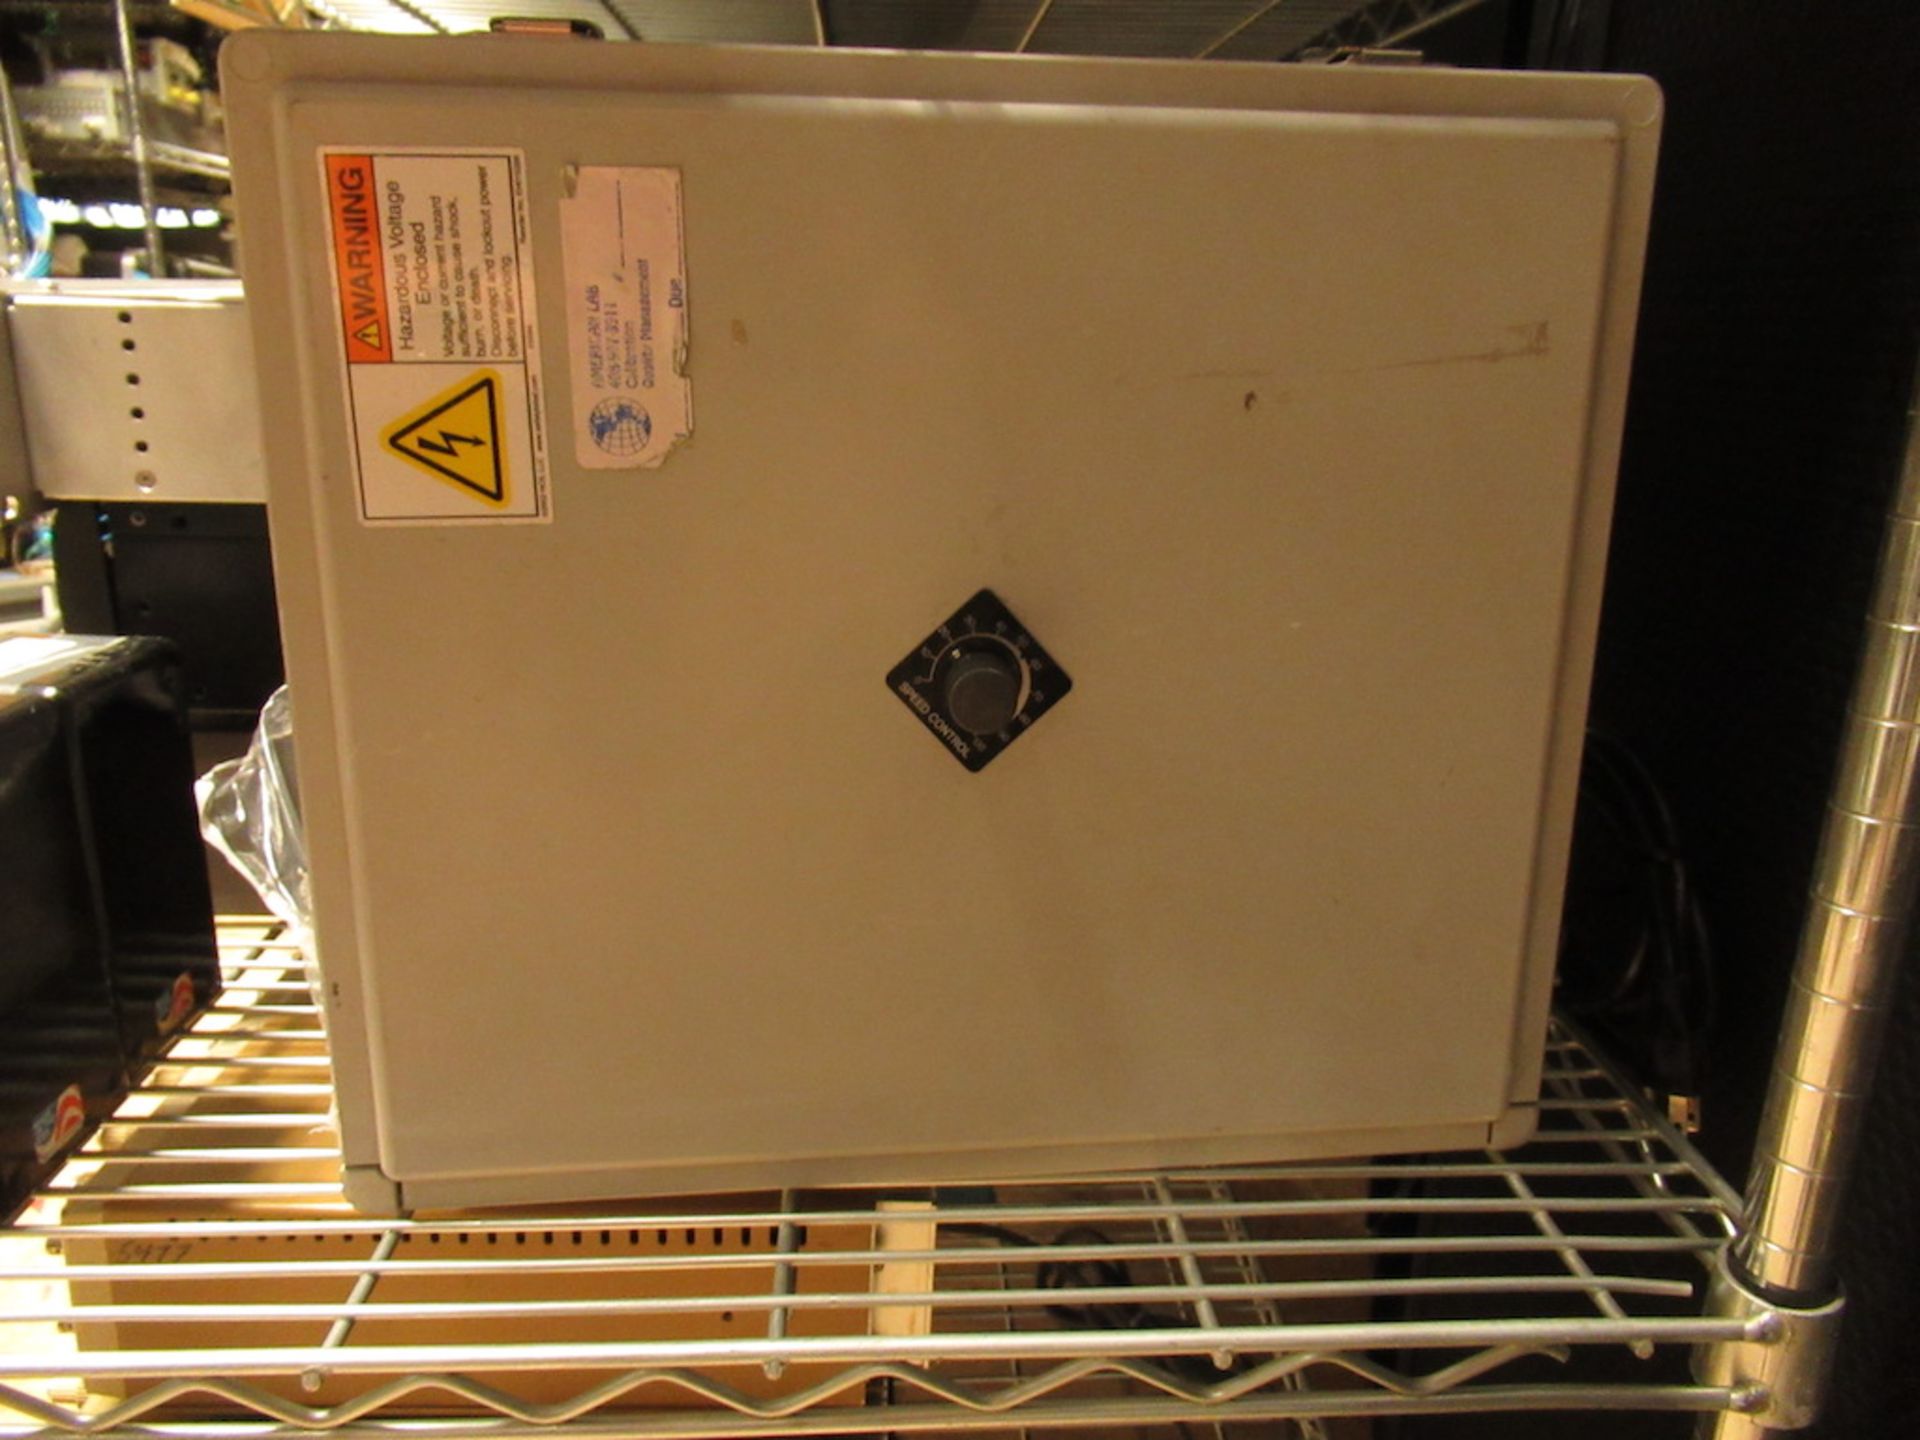 Lot to include entire rack: (22) HP 83236B PCS Interface , (1)v HP 83206A TDMA Cellular Adapter, - Image 20 of 23